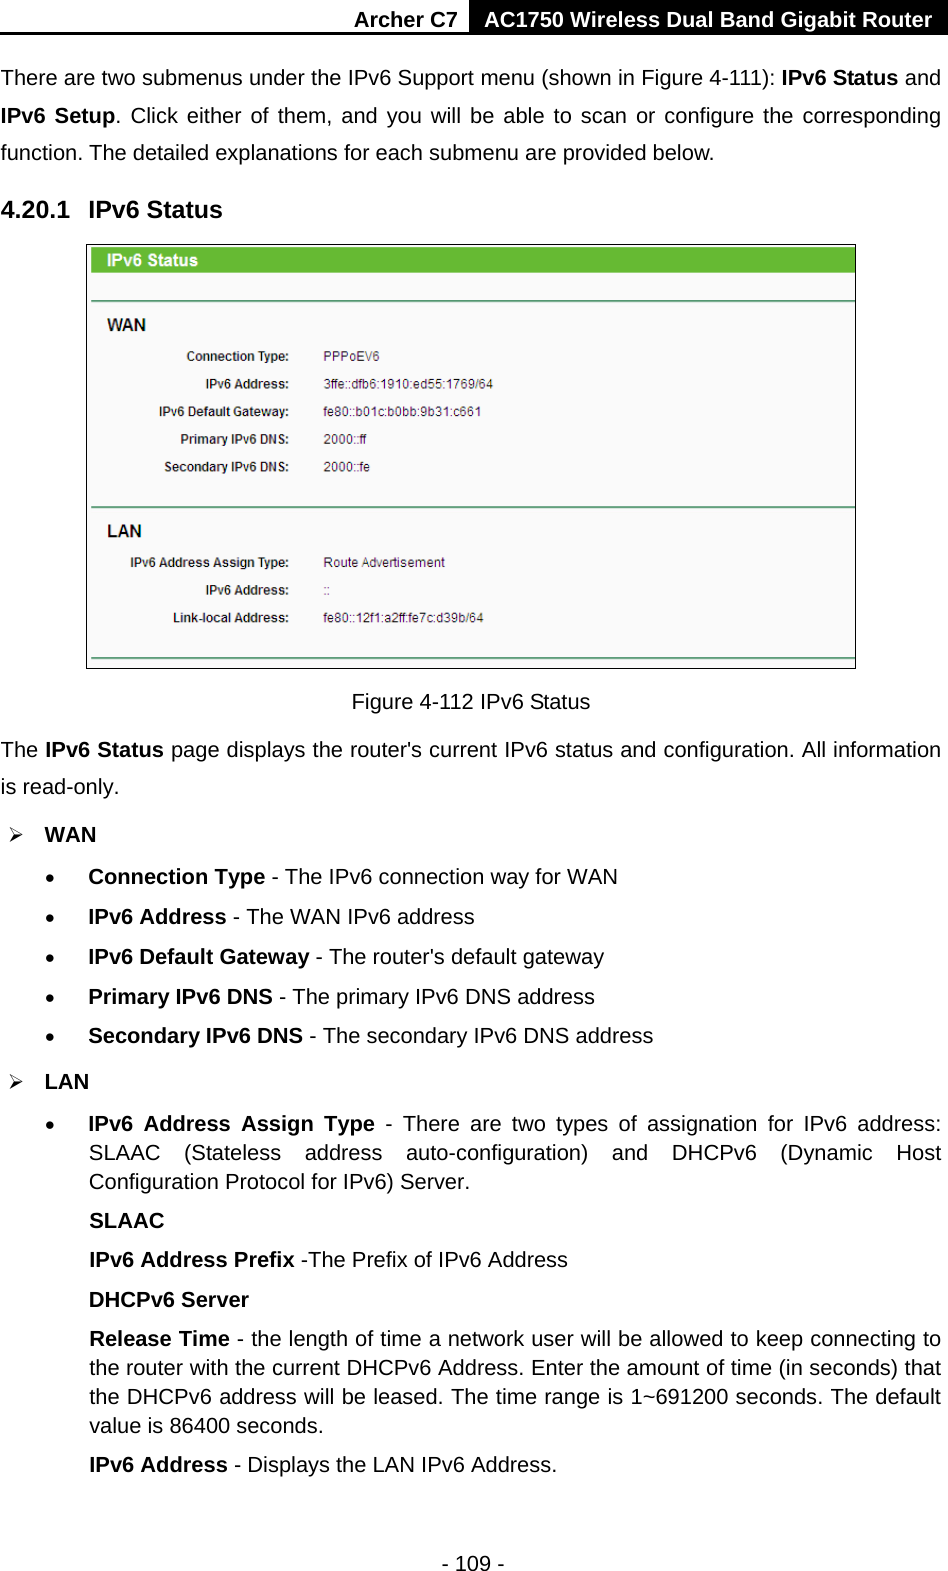 Archer C7 AC1750 Wireless Dual Band Gigabit Router  - 109 - There are two submenus under the IPv6 Support menu (shown in Figure 4-111): IPv6 Status and IPv6 Setup. Click either of them, and you will be able to scan or configure the corresponding function. The detailed explanations for each submenu are provided below. 4.20.1 IPv6 Status  Figure 4-112 IPv6 Status The IPv6 Status page displays the router&apos;s current IPv6 status and configuration. All information is read-only.    WAN   • Connection Type - The IPv6 connection way for WAN • IPv6 Address - The WAN IPv6 address • IPv6 Default Gateway - The router&apos;s default gateway • Primary IPv6 DNS - The primary IPv6 DNS address • Secondary IPv6 DNS - The secondary IPv6 DNS address  LAN • IPv6 Address Assign Type  -  There are two types of assignation for IPv6 address: SLAAC (Stateless address auto-configuration) and DHCPv6 (Dynamic Host Configuration Protocol for IPv6) Server. SLAAC IPv6 Address Prefix -The Prefix of IPv6 Address DHCPv6 Server Release Time - the length of time a network user will be allowed to keep connecting to the router with the current DHCPv6 Address. Enter the amount of time (in seconds) that the DHCPv6 address will be leased. The time range is 1~691200 seconds. The default value is 86400 seconds. IPv6 Address - Displays the LAN IPv6 Address. 